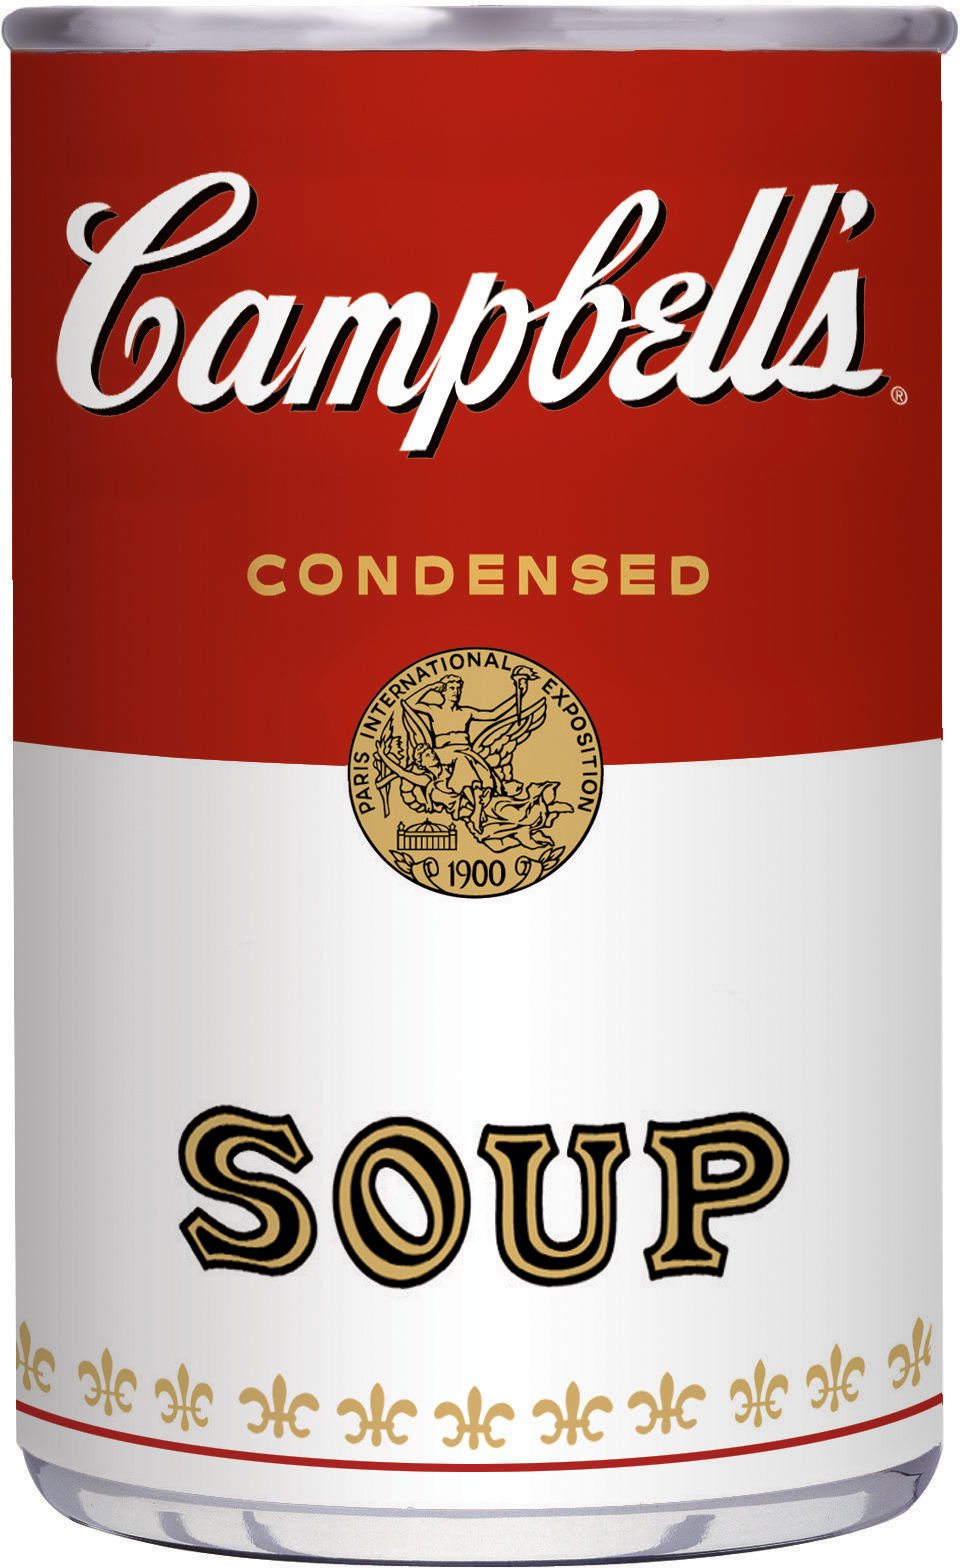     For The Campbell S Labels For Education Click On The Following Link